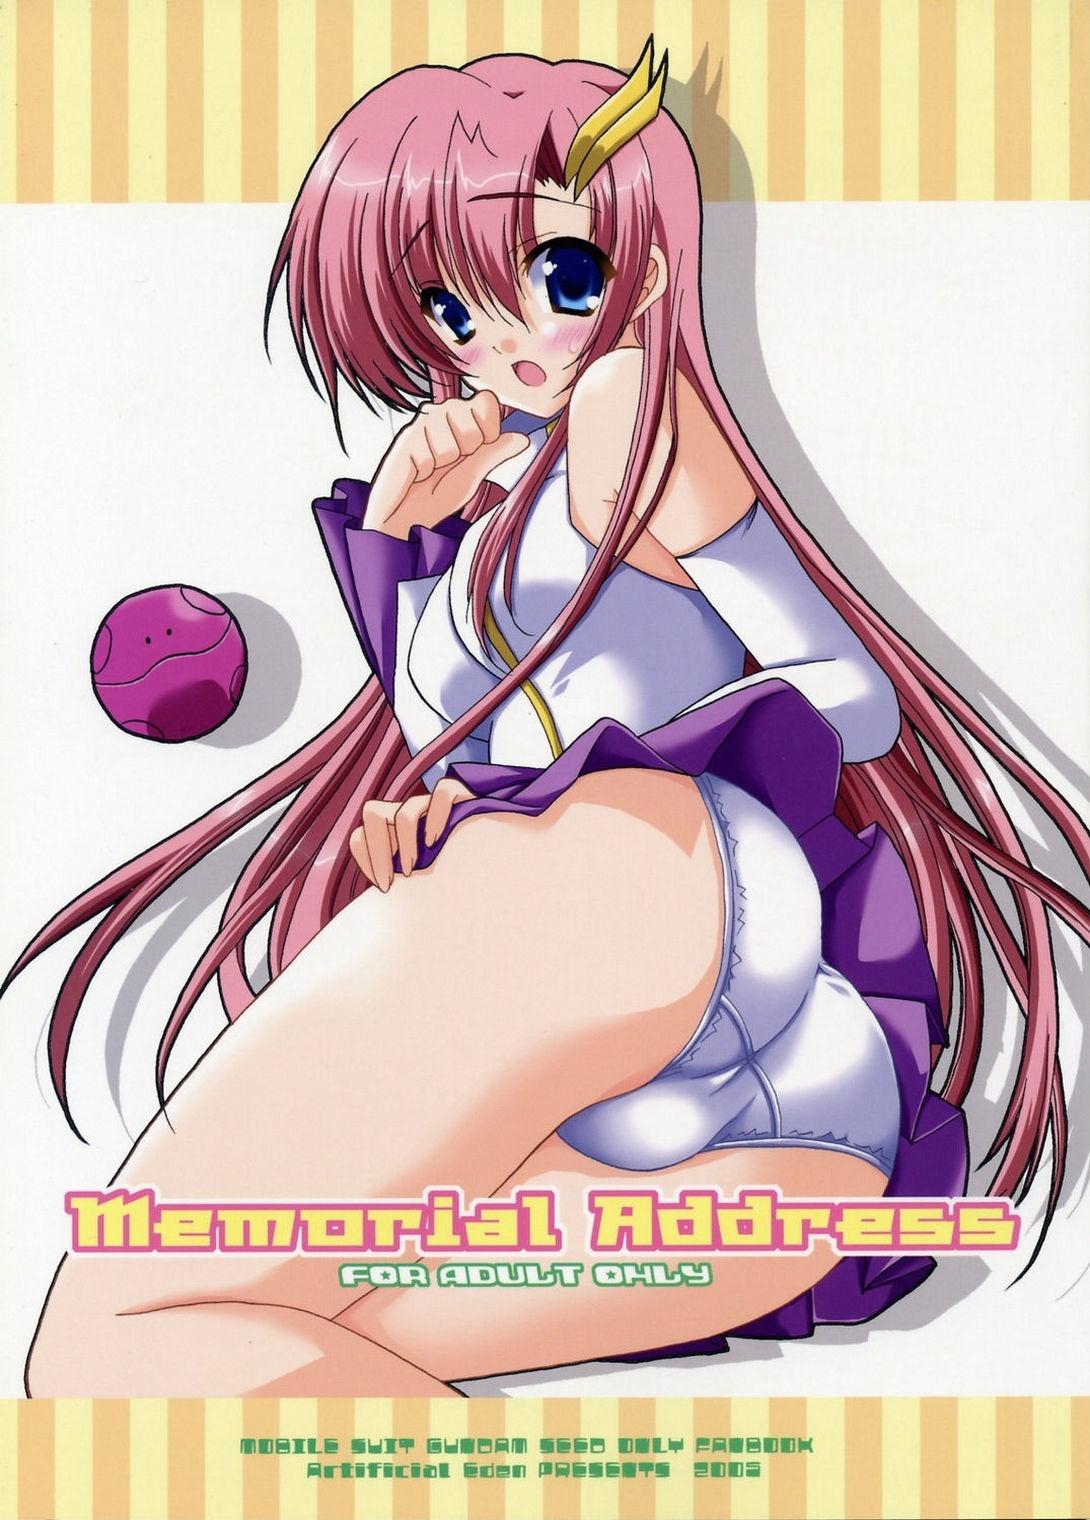 Mmf Memorial Address - Gundam seed Ejaculation - Picture 1